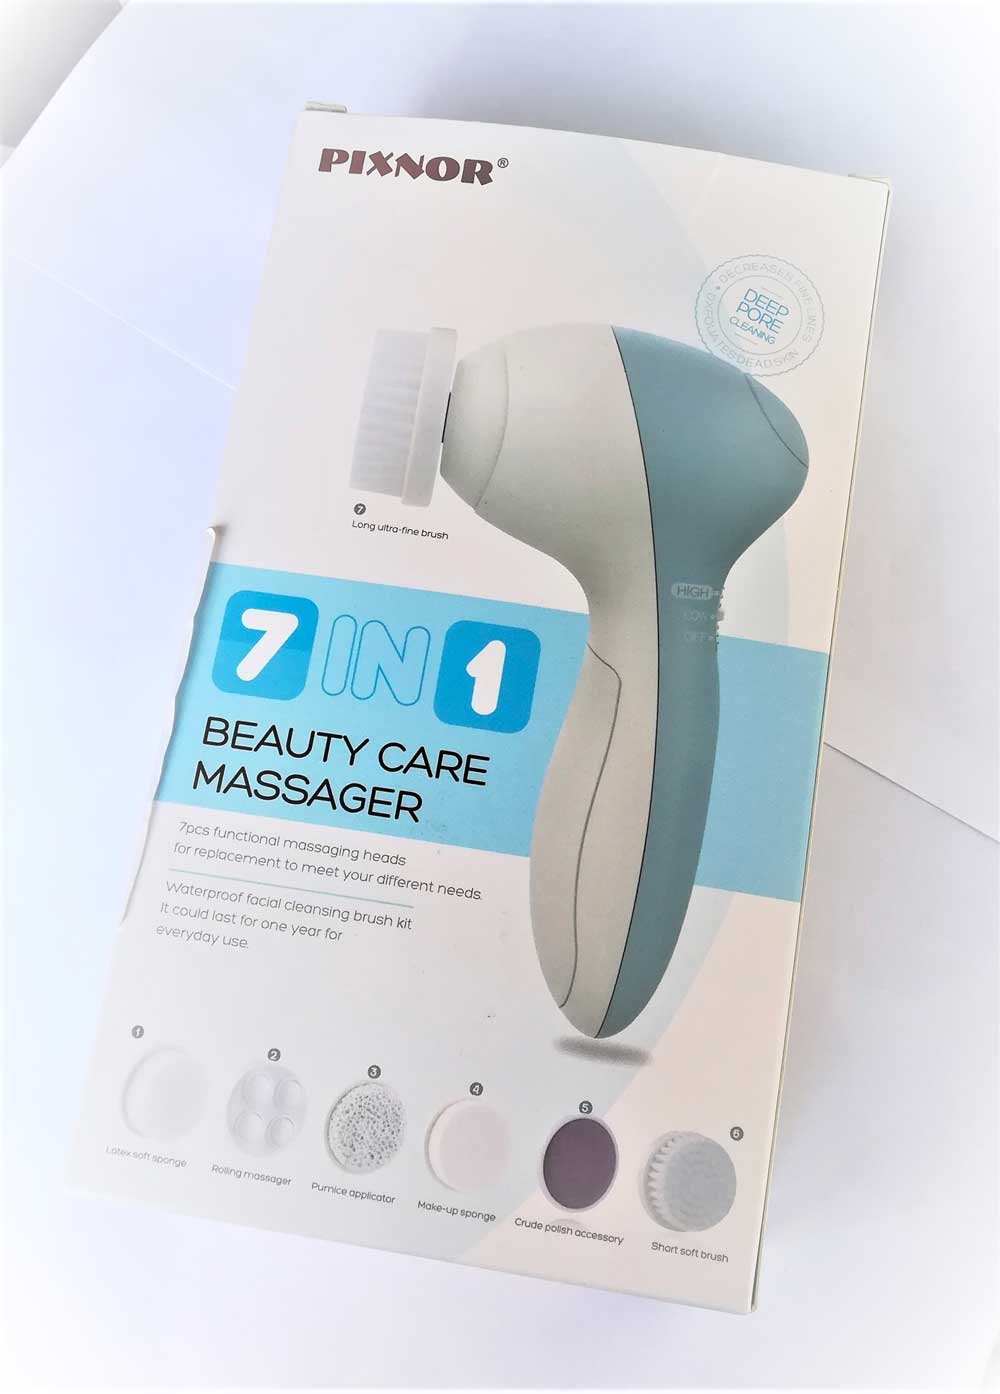 Pixnor 7 in 1 Beauty Care Massager